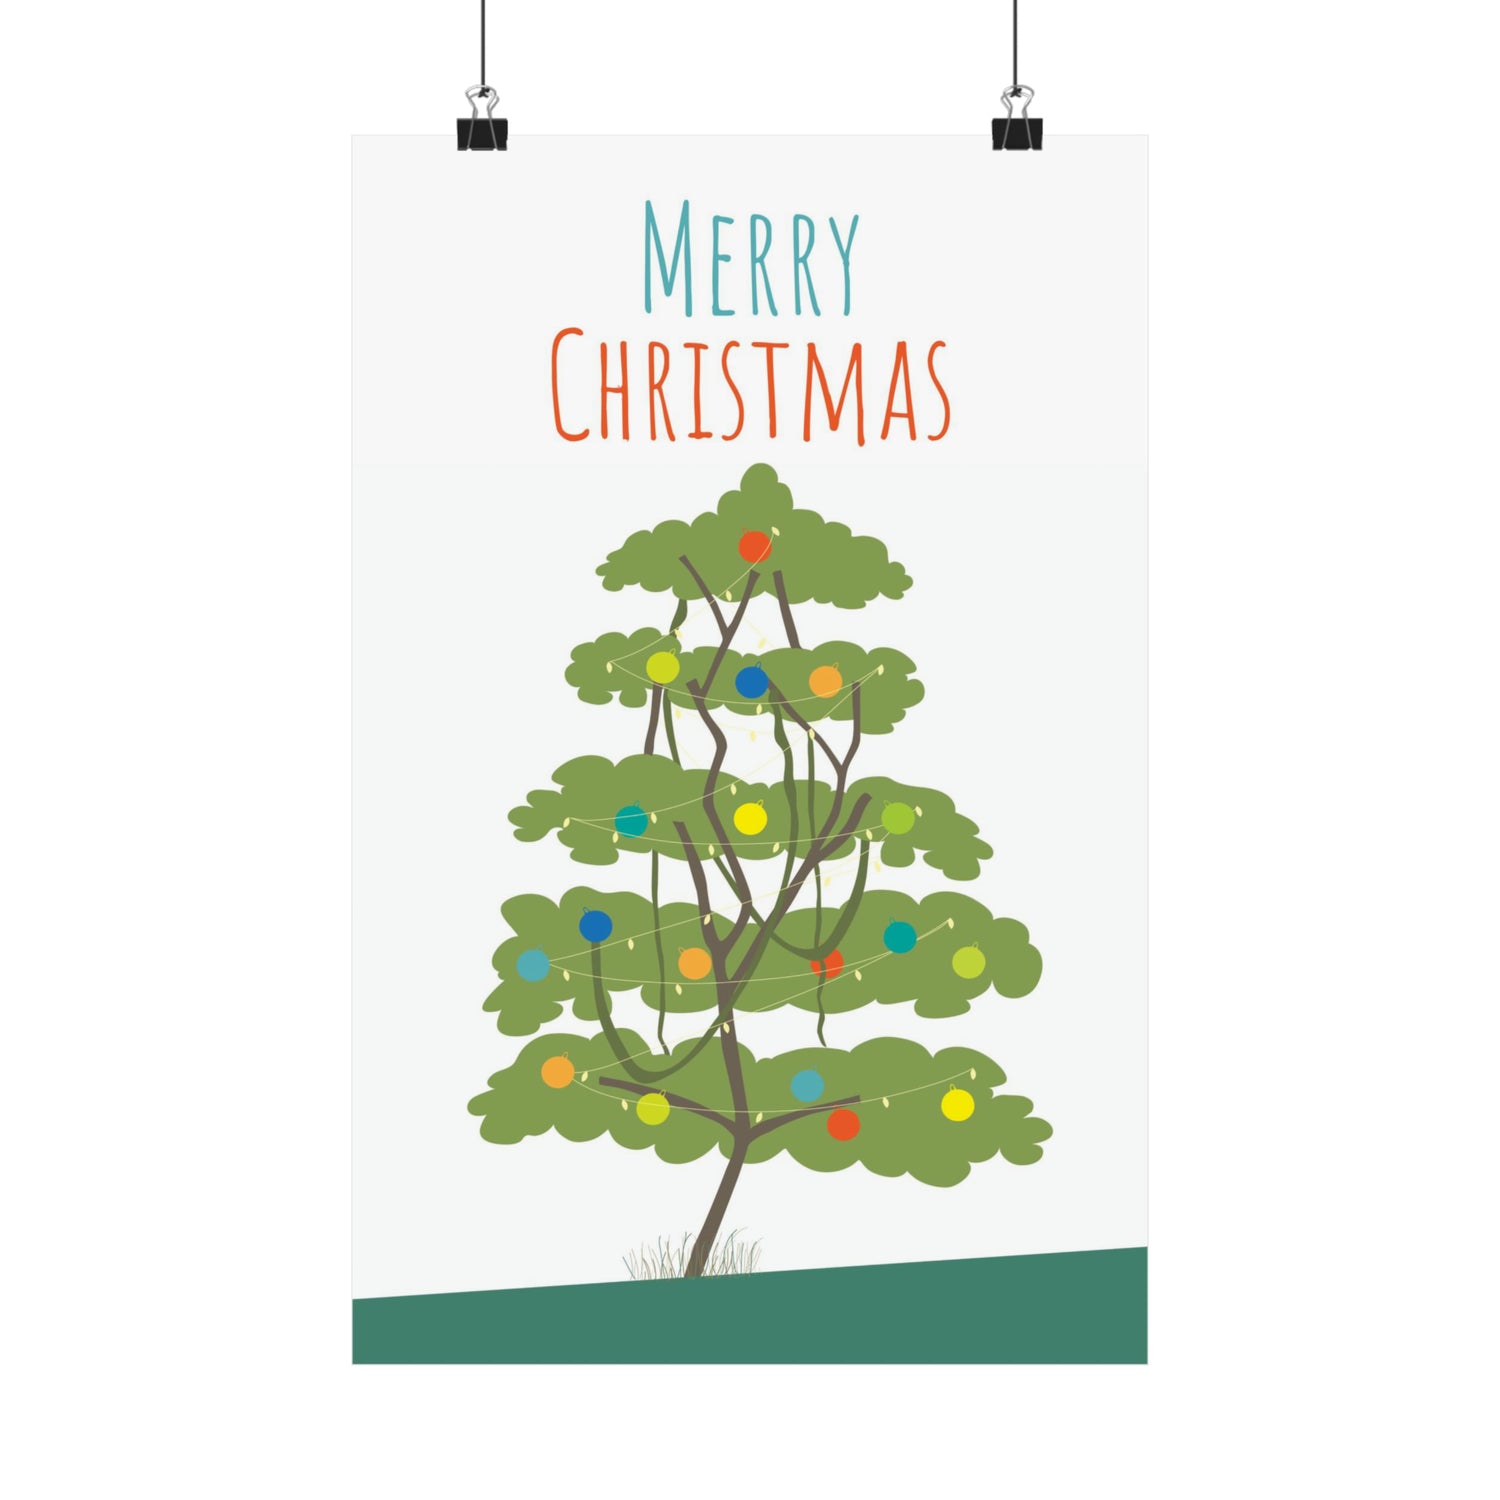 Christmas Tree Poster in white background with clips holding the poster up